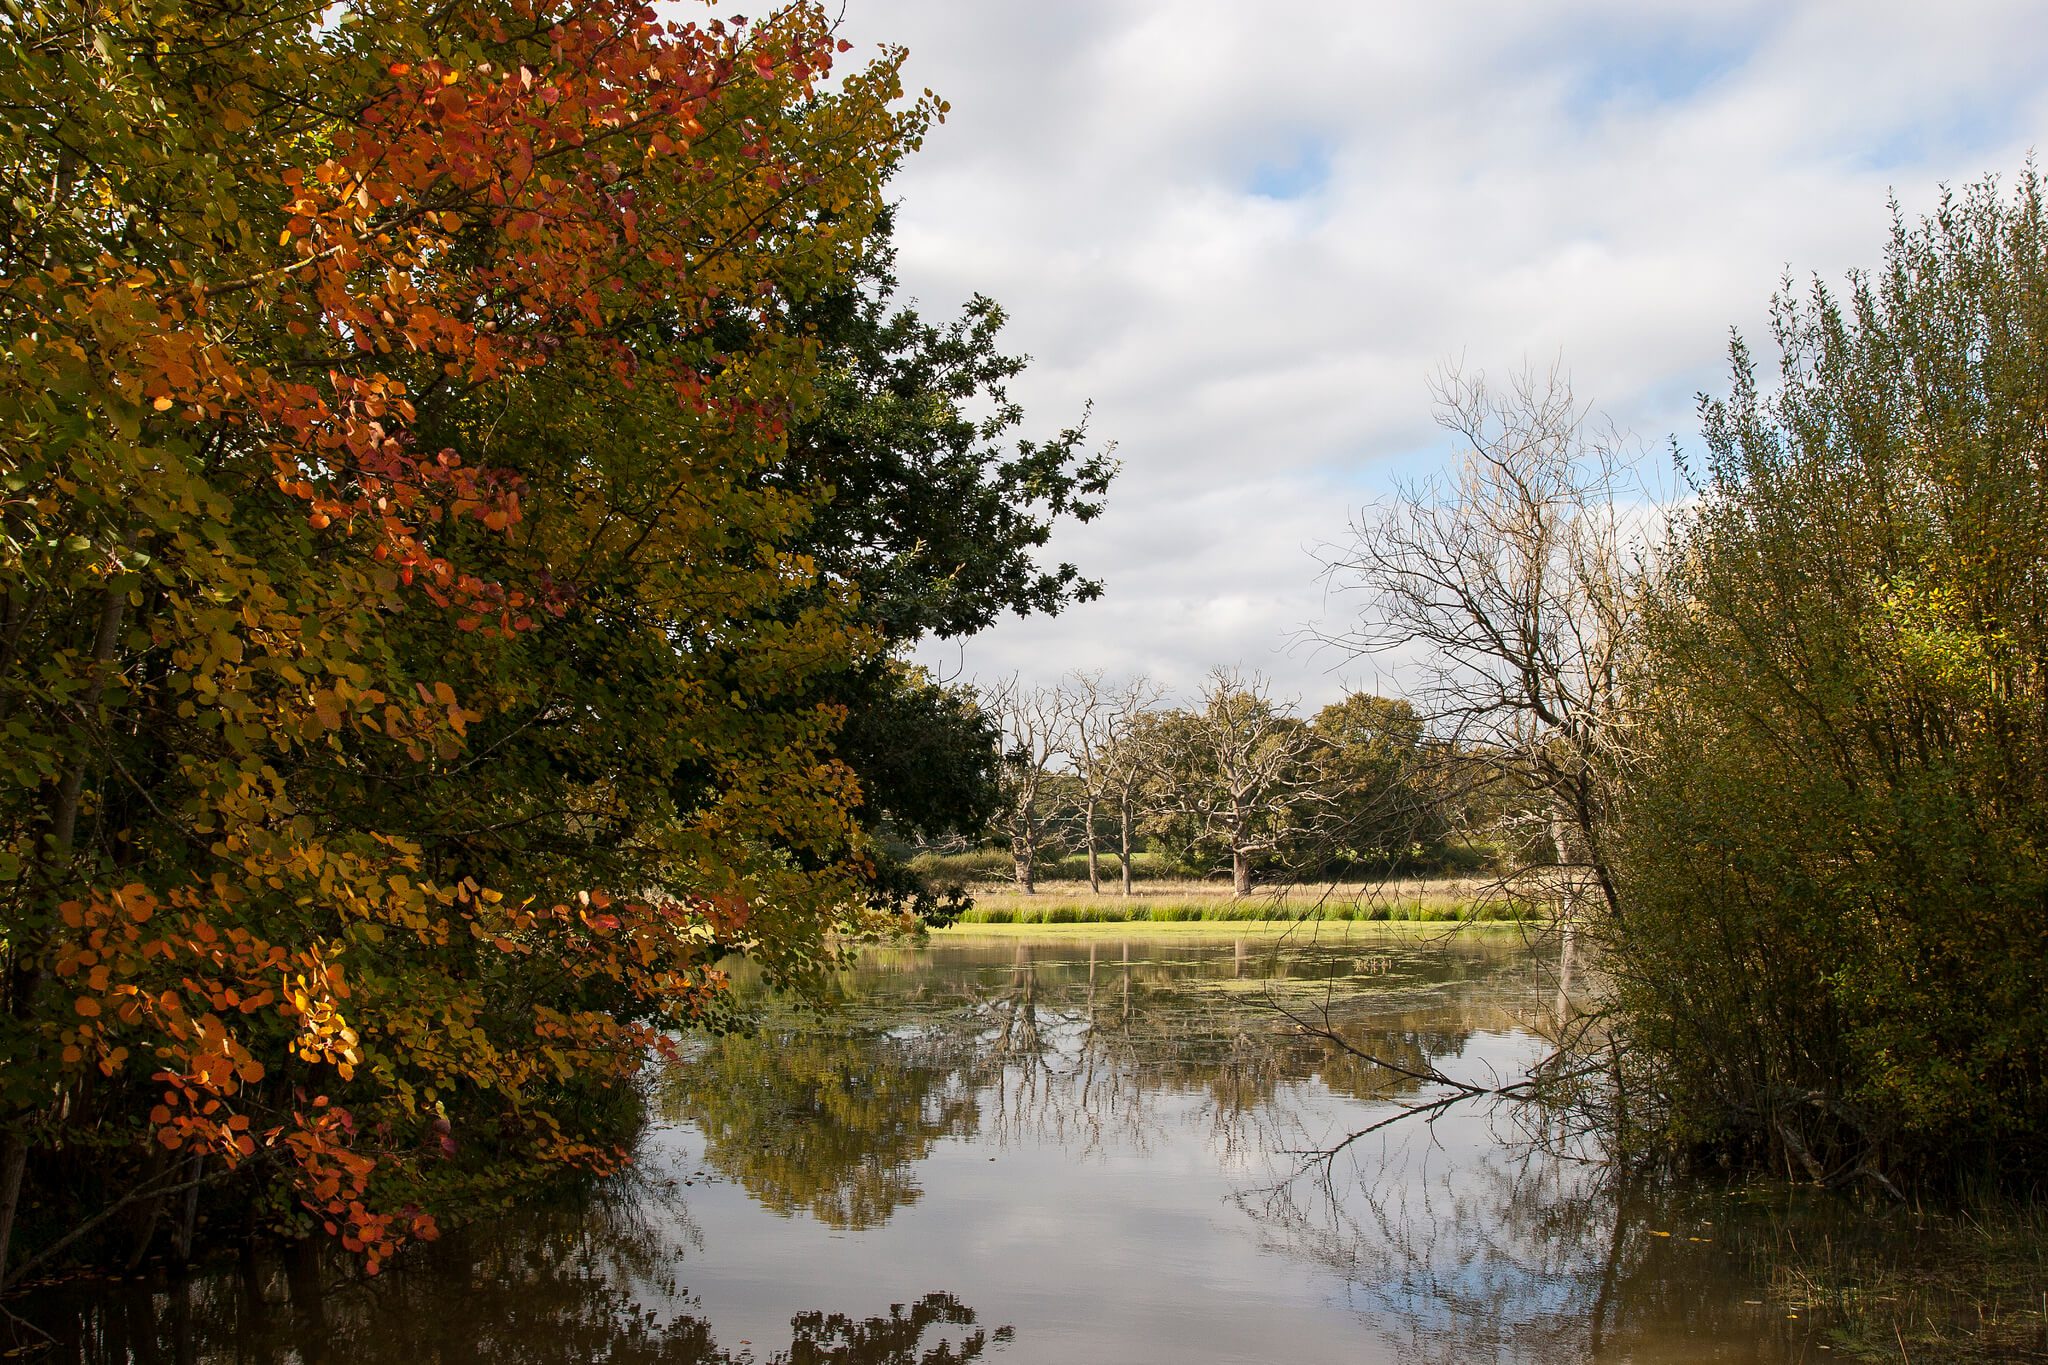 Calm pond with trees surrounding and view to fields.